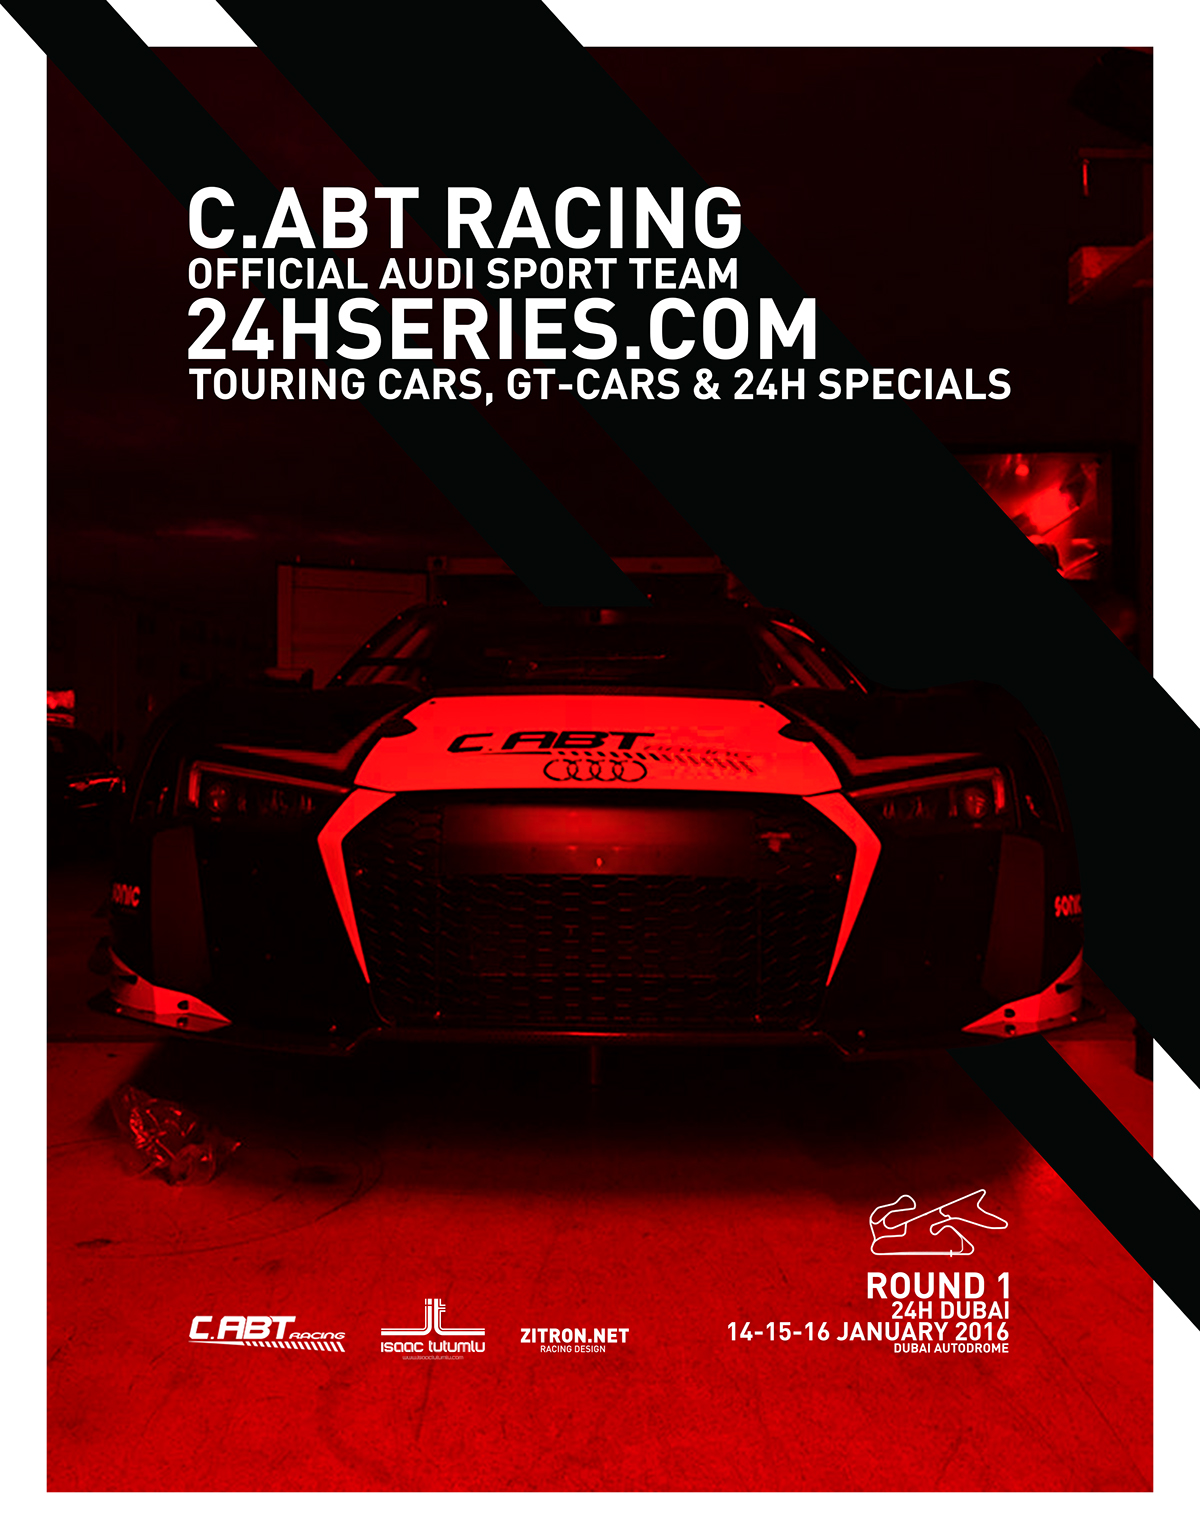 brand Racing Race Drivers drivers teams motorsports racing design DESIGN FOR RACERS zitron TEAM RACERS gt Touring Car Championship Championship livery design